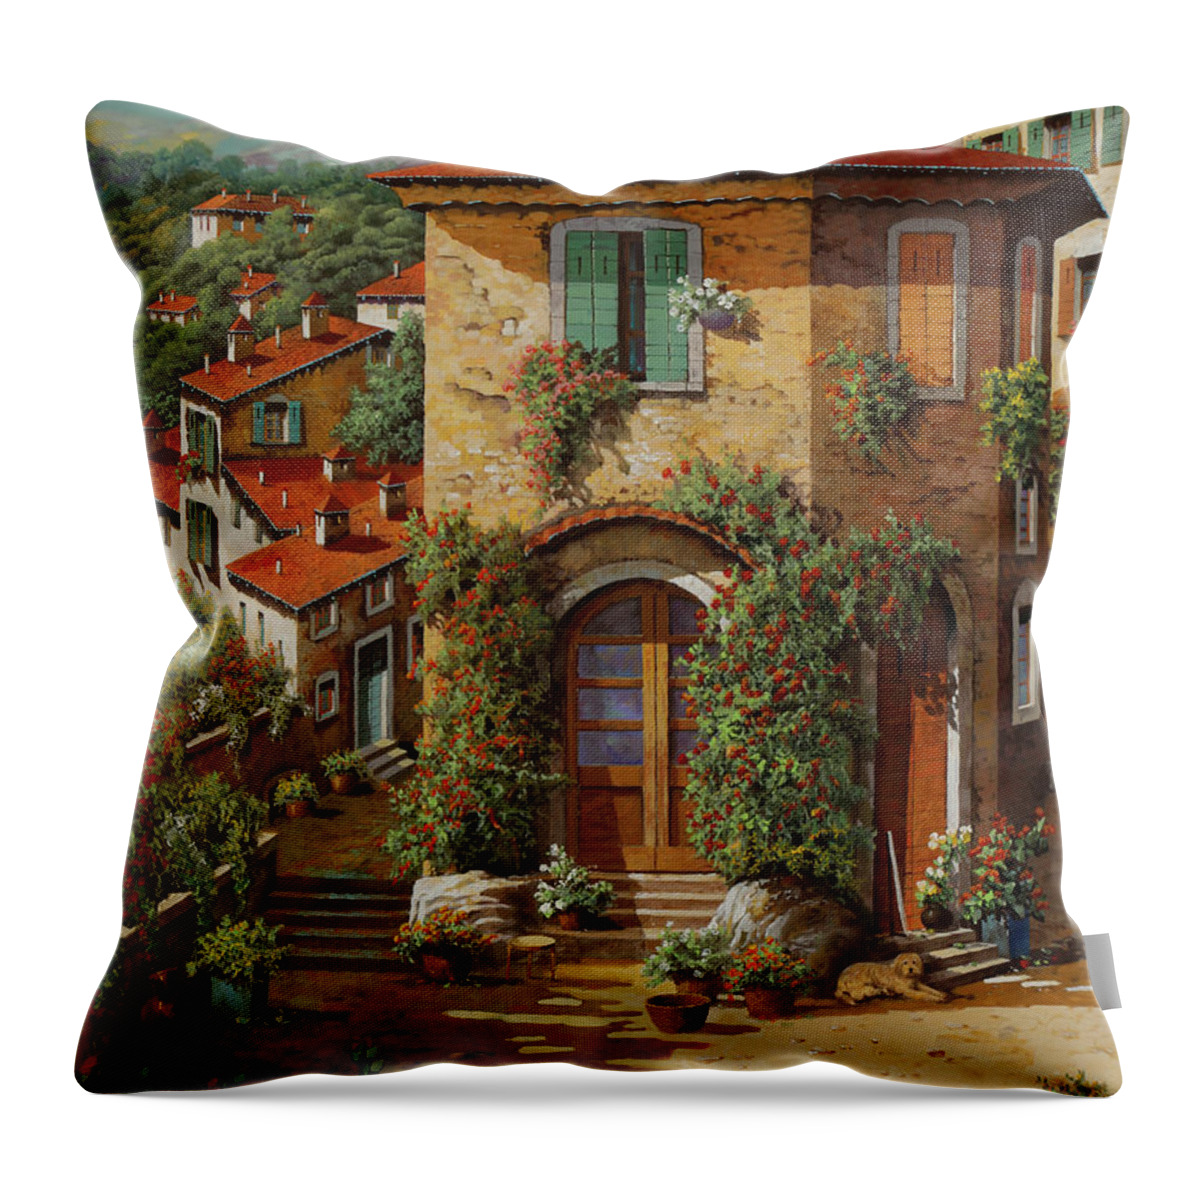 Instagram Throw Pillow featuring the painting Il Cielo Verdolino In Ottobre Novembre 2019 by Guido Borelli